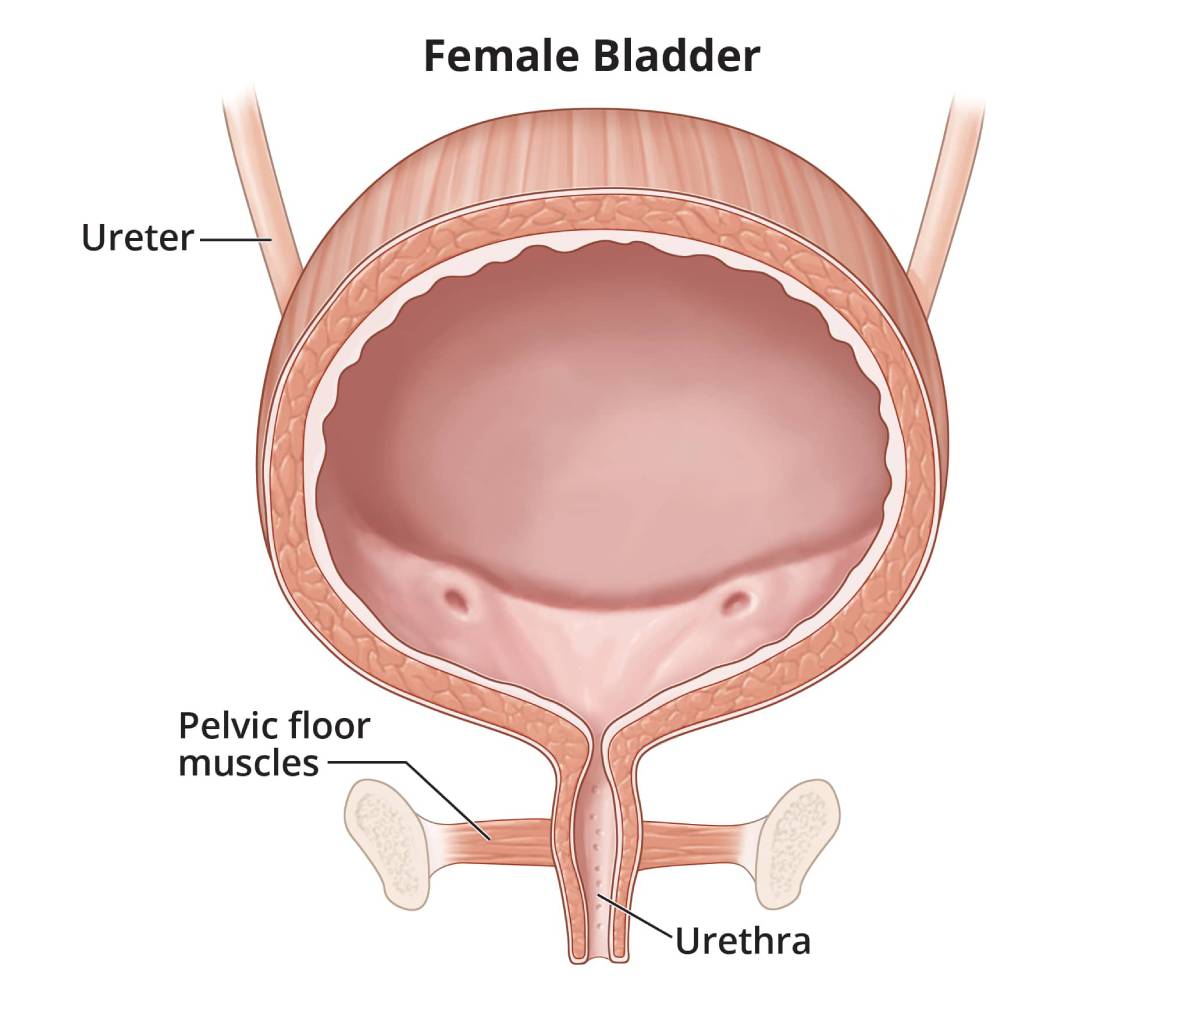 Bladder Control Issues: A common problem that may be overlooked